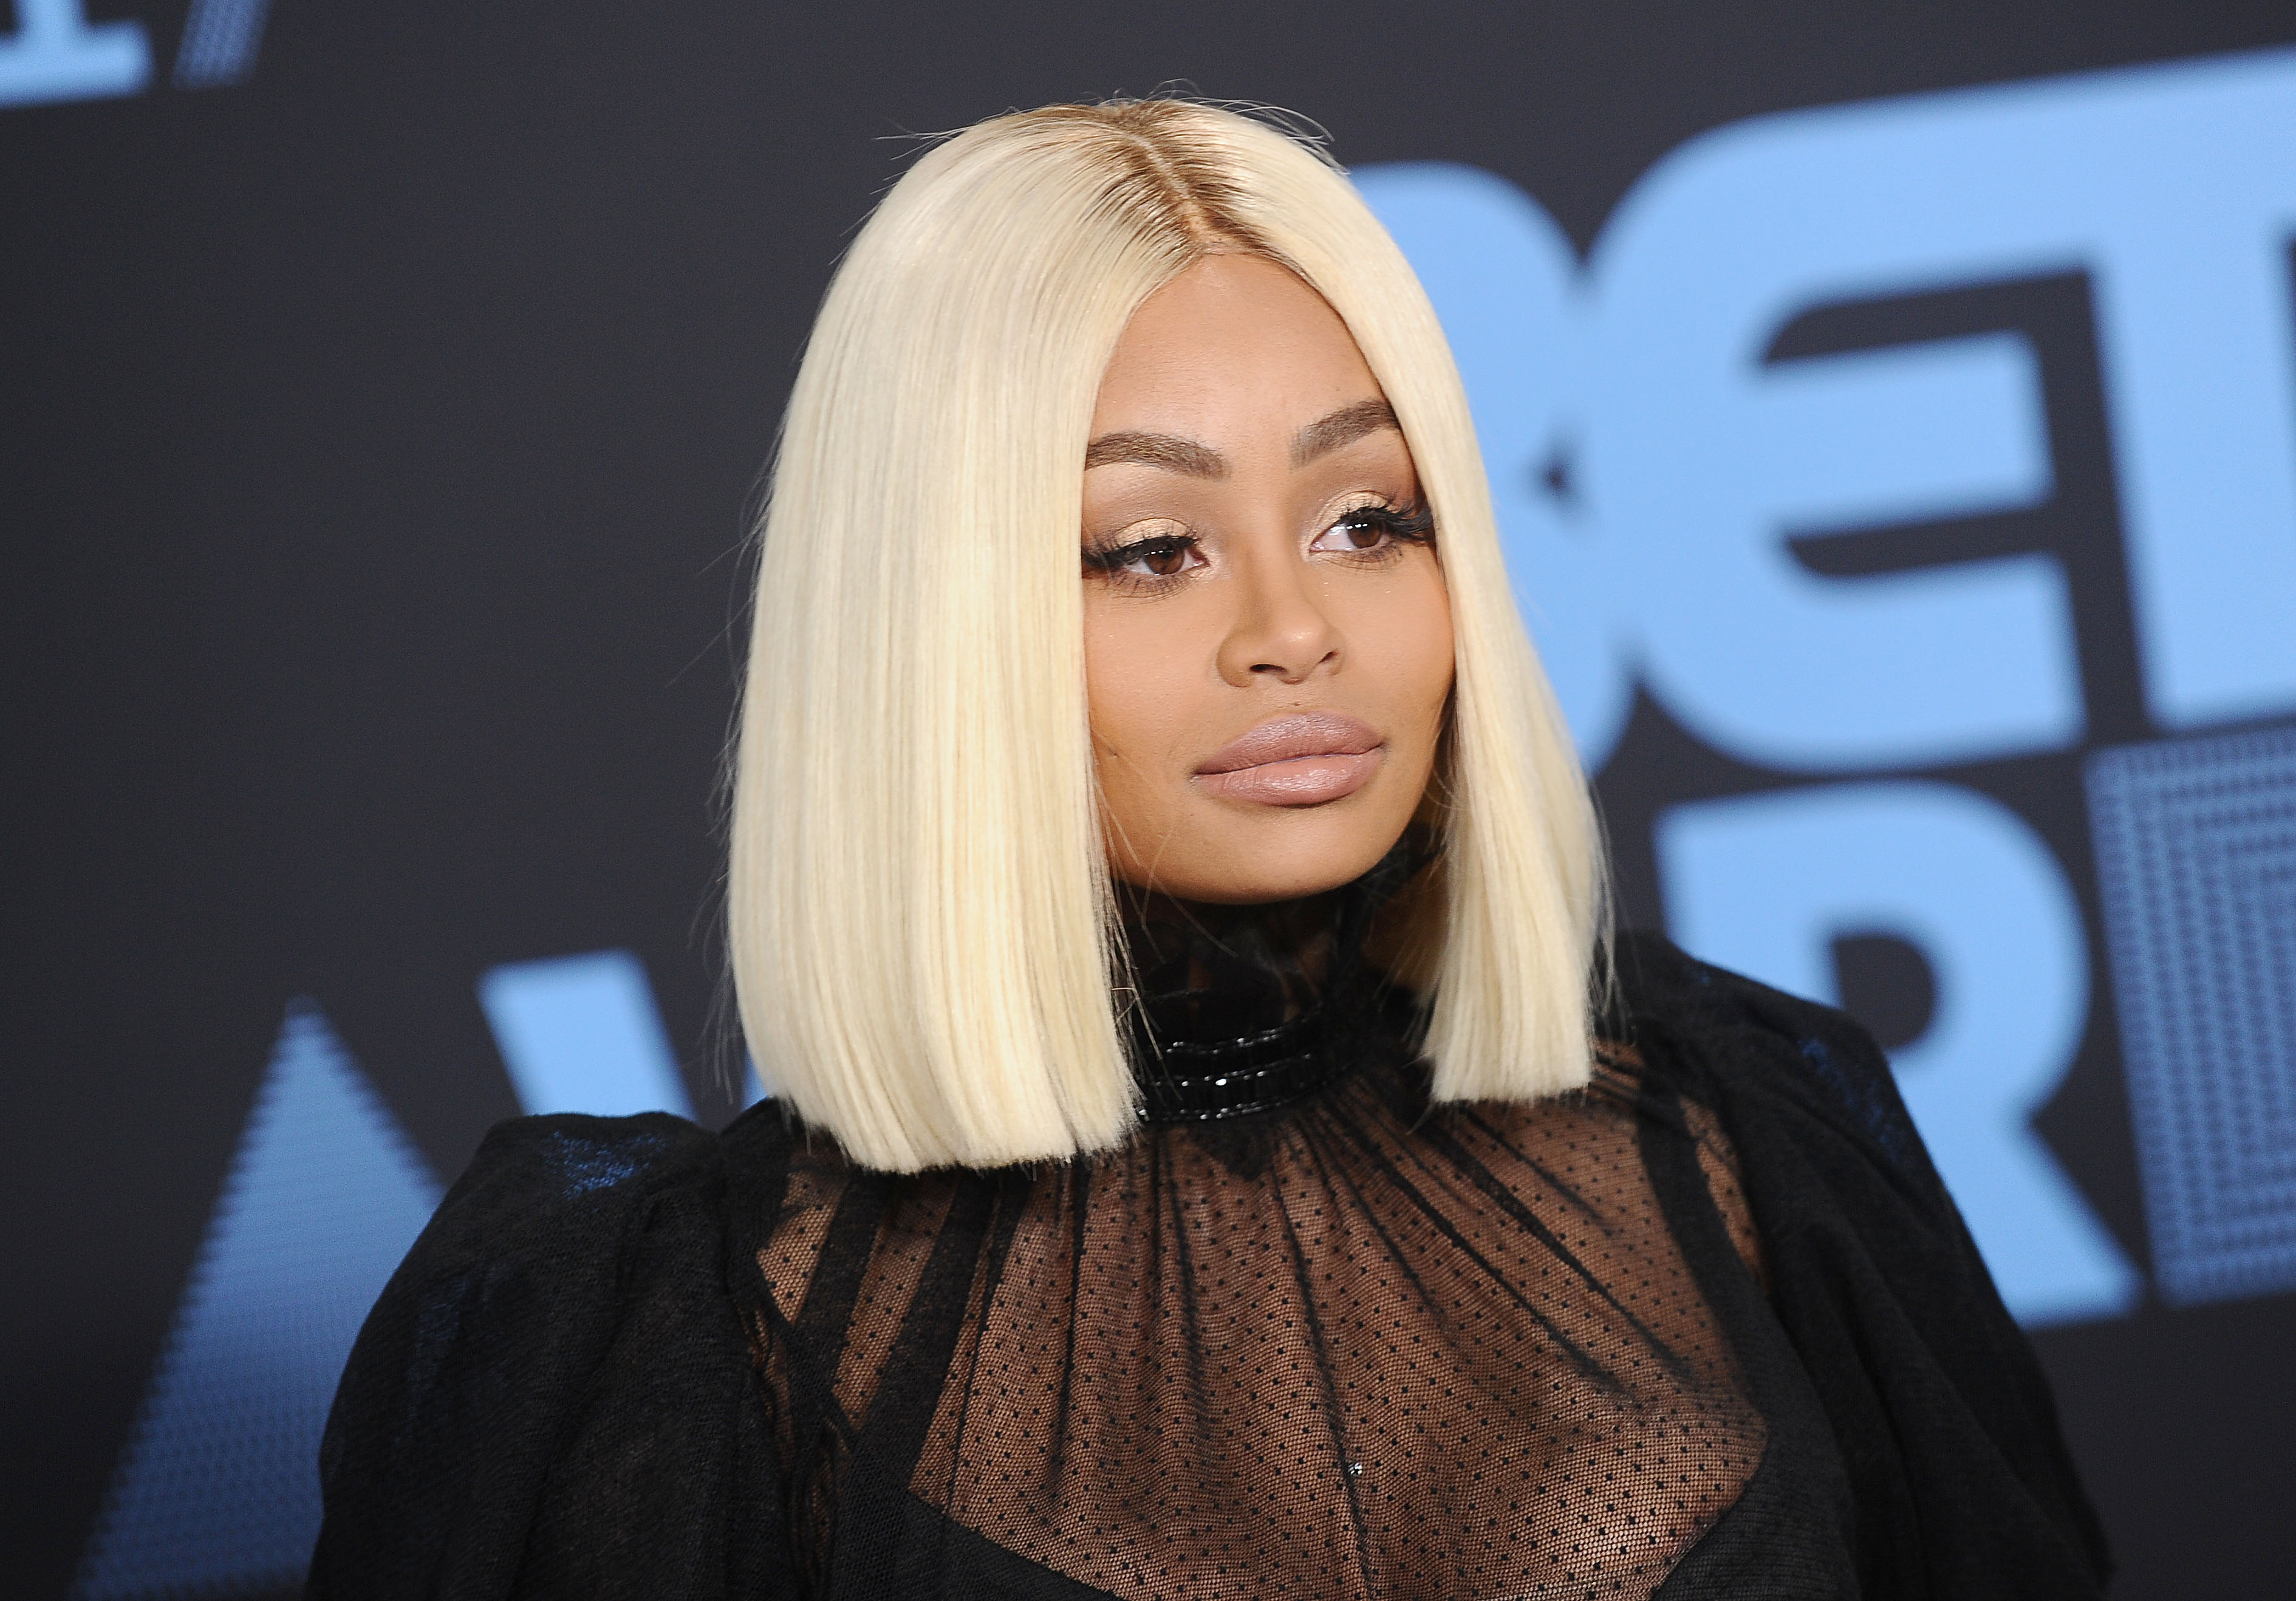 Blac Chyna attends the 2017 BET Awards at Microsoft Theater on June 25, 2017 in Los Angeles, California. (Jason LaVeris&mdash;FilmMagic/Getty Images)